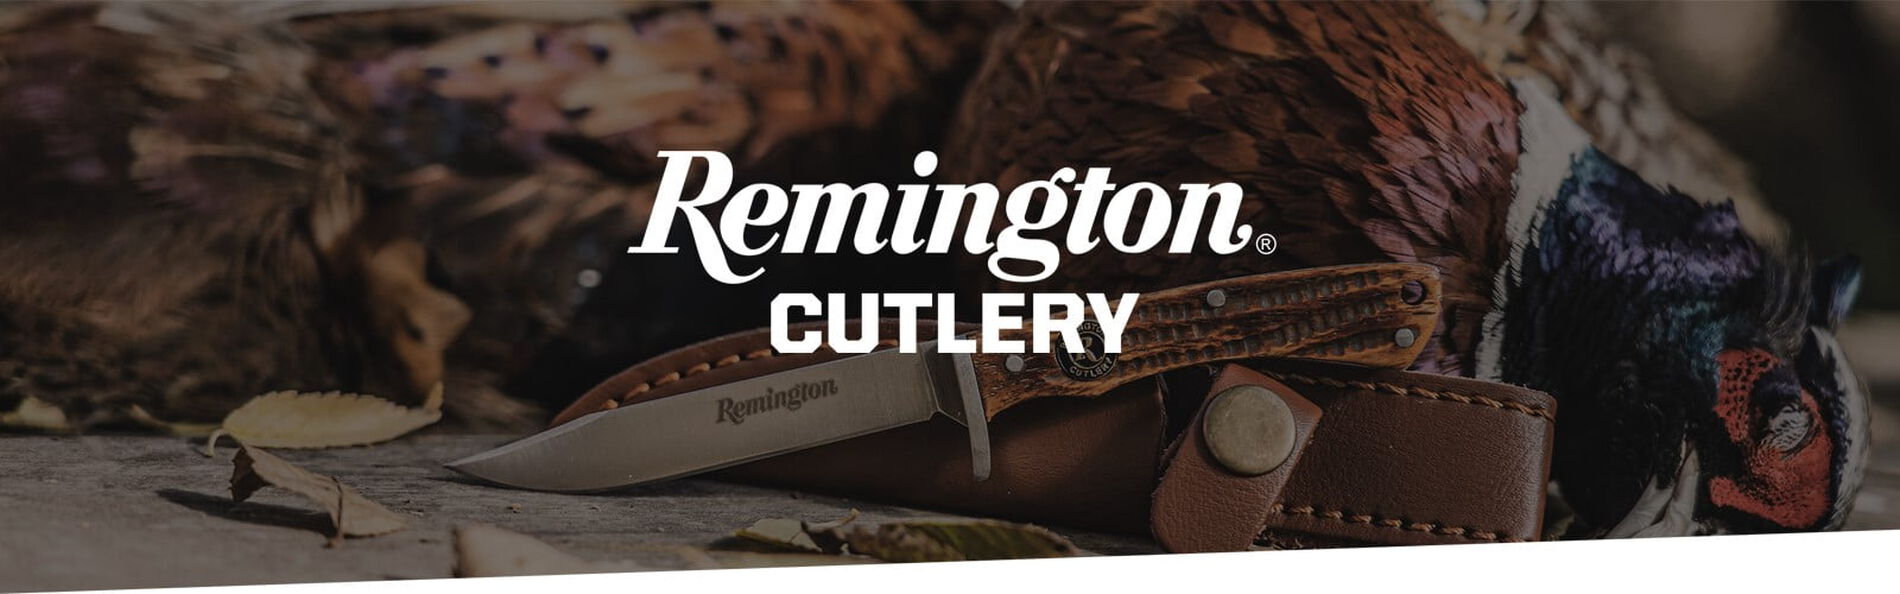 Remington Cutlery text over a Remington knife propped in front of a dead pheasant image